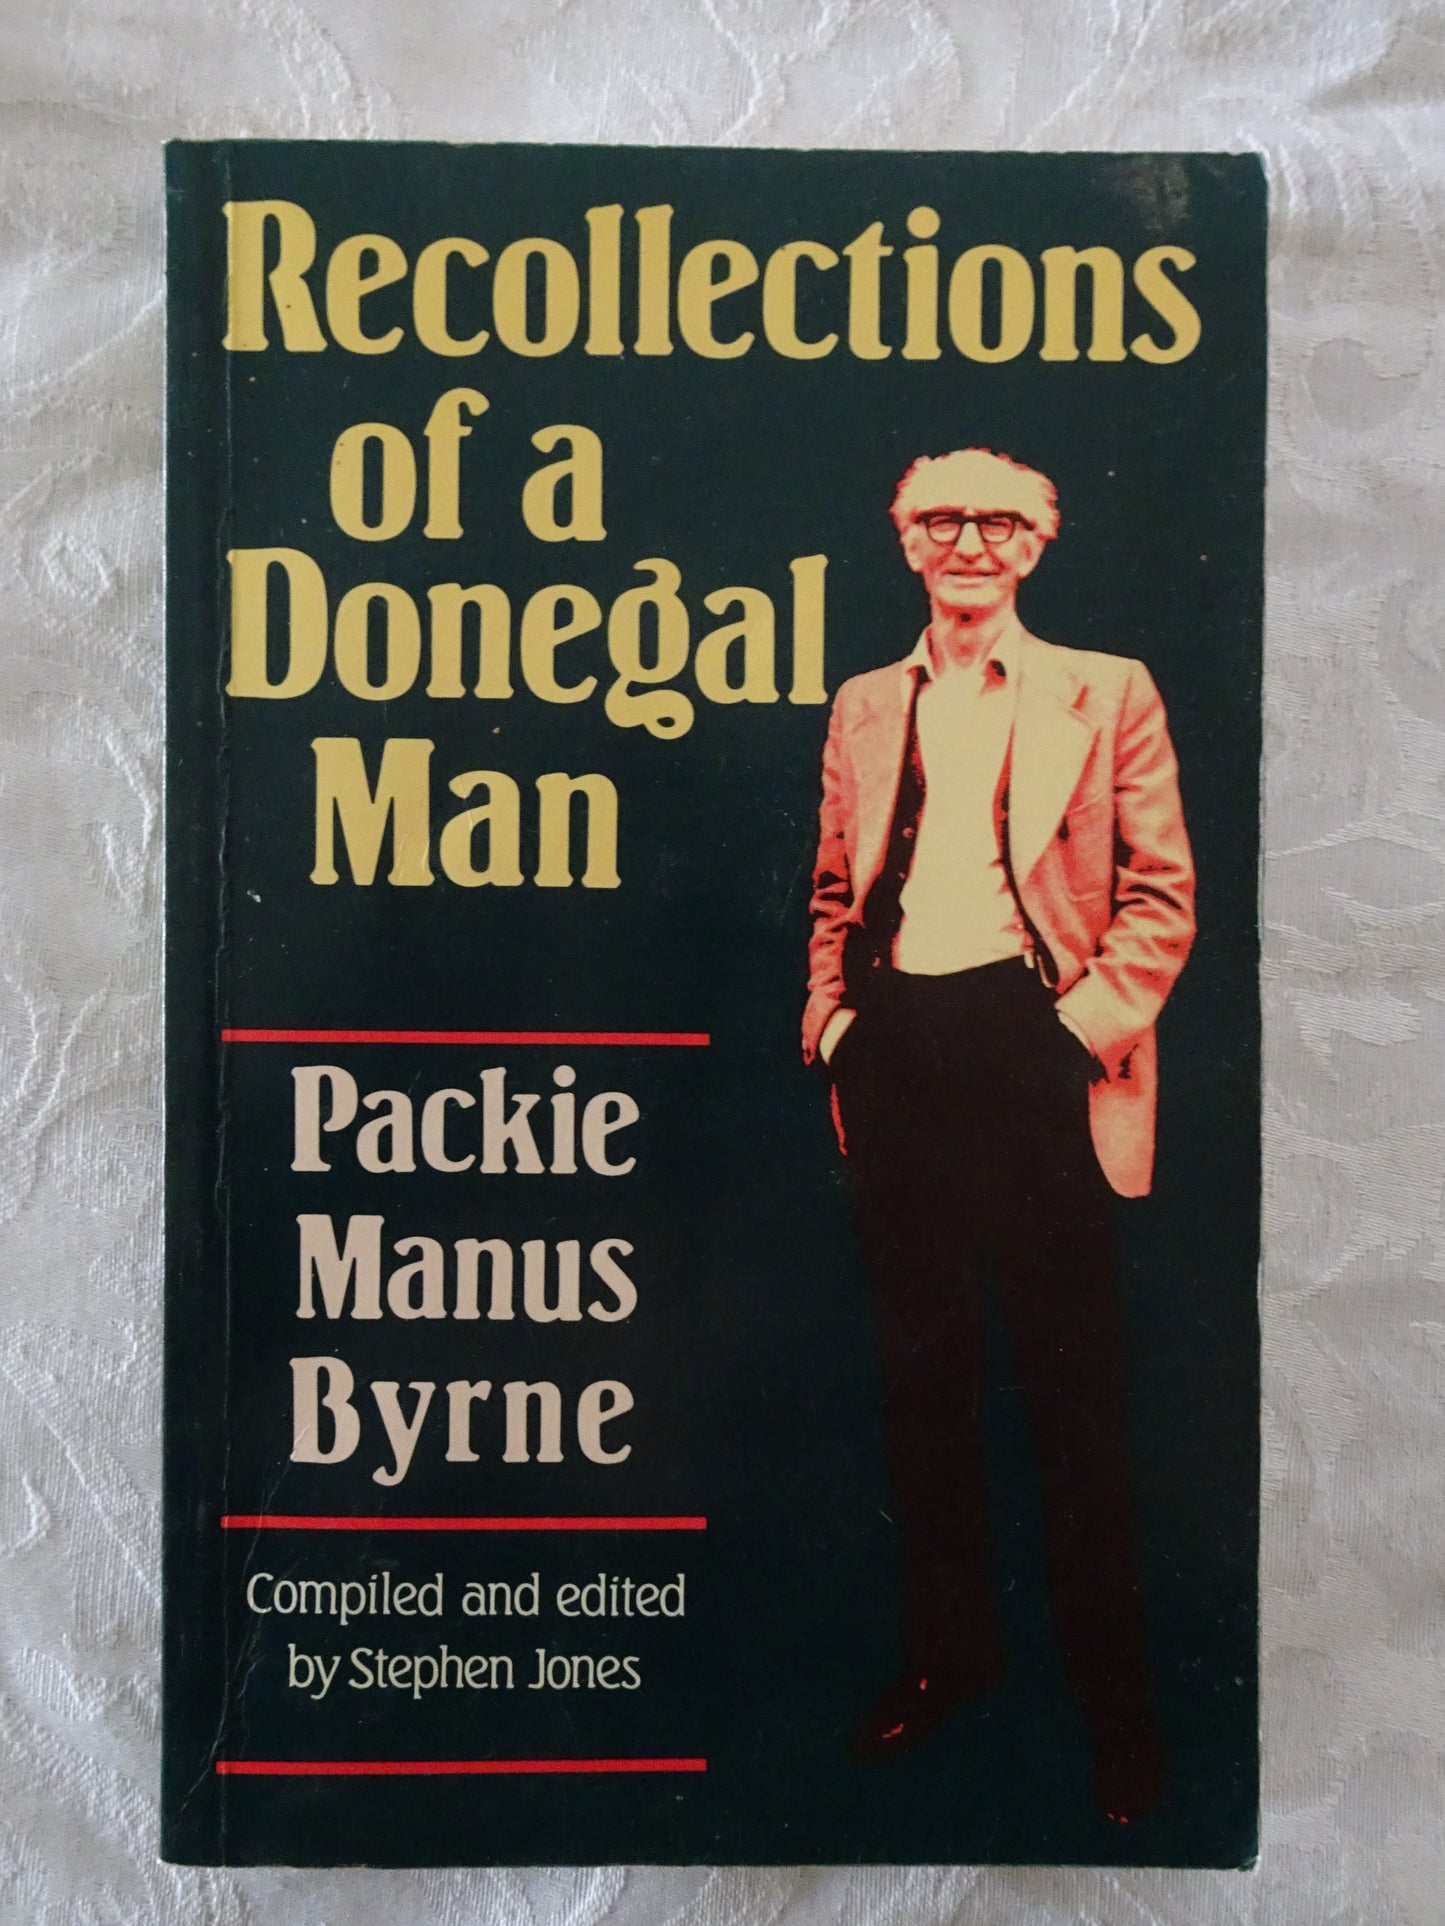 Recollections of a Donegal Man by Packie Manus Byrne